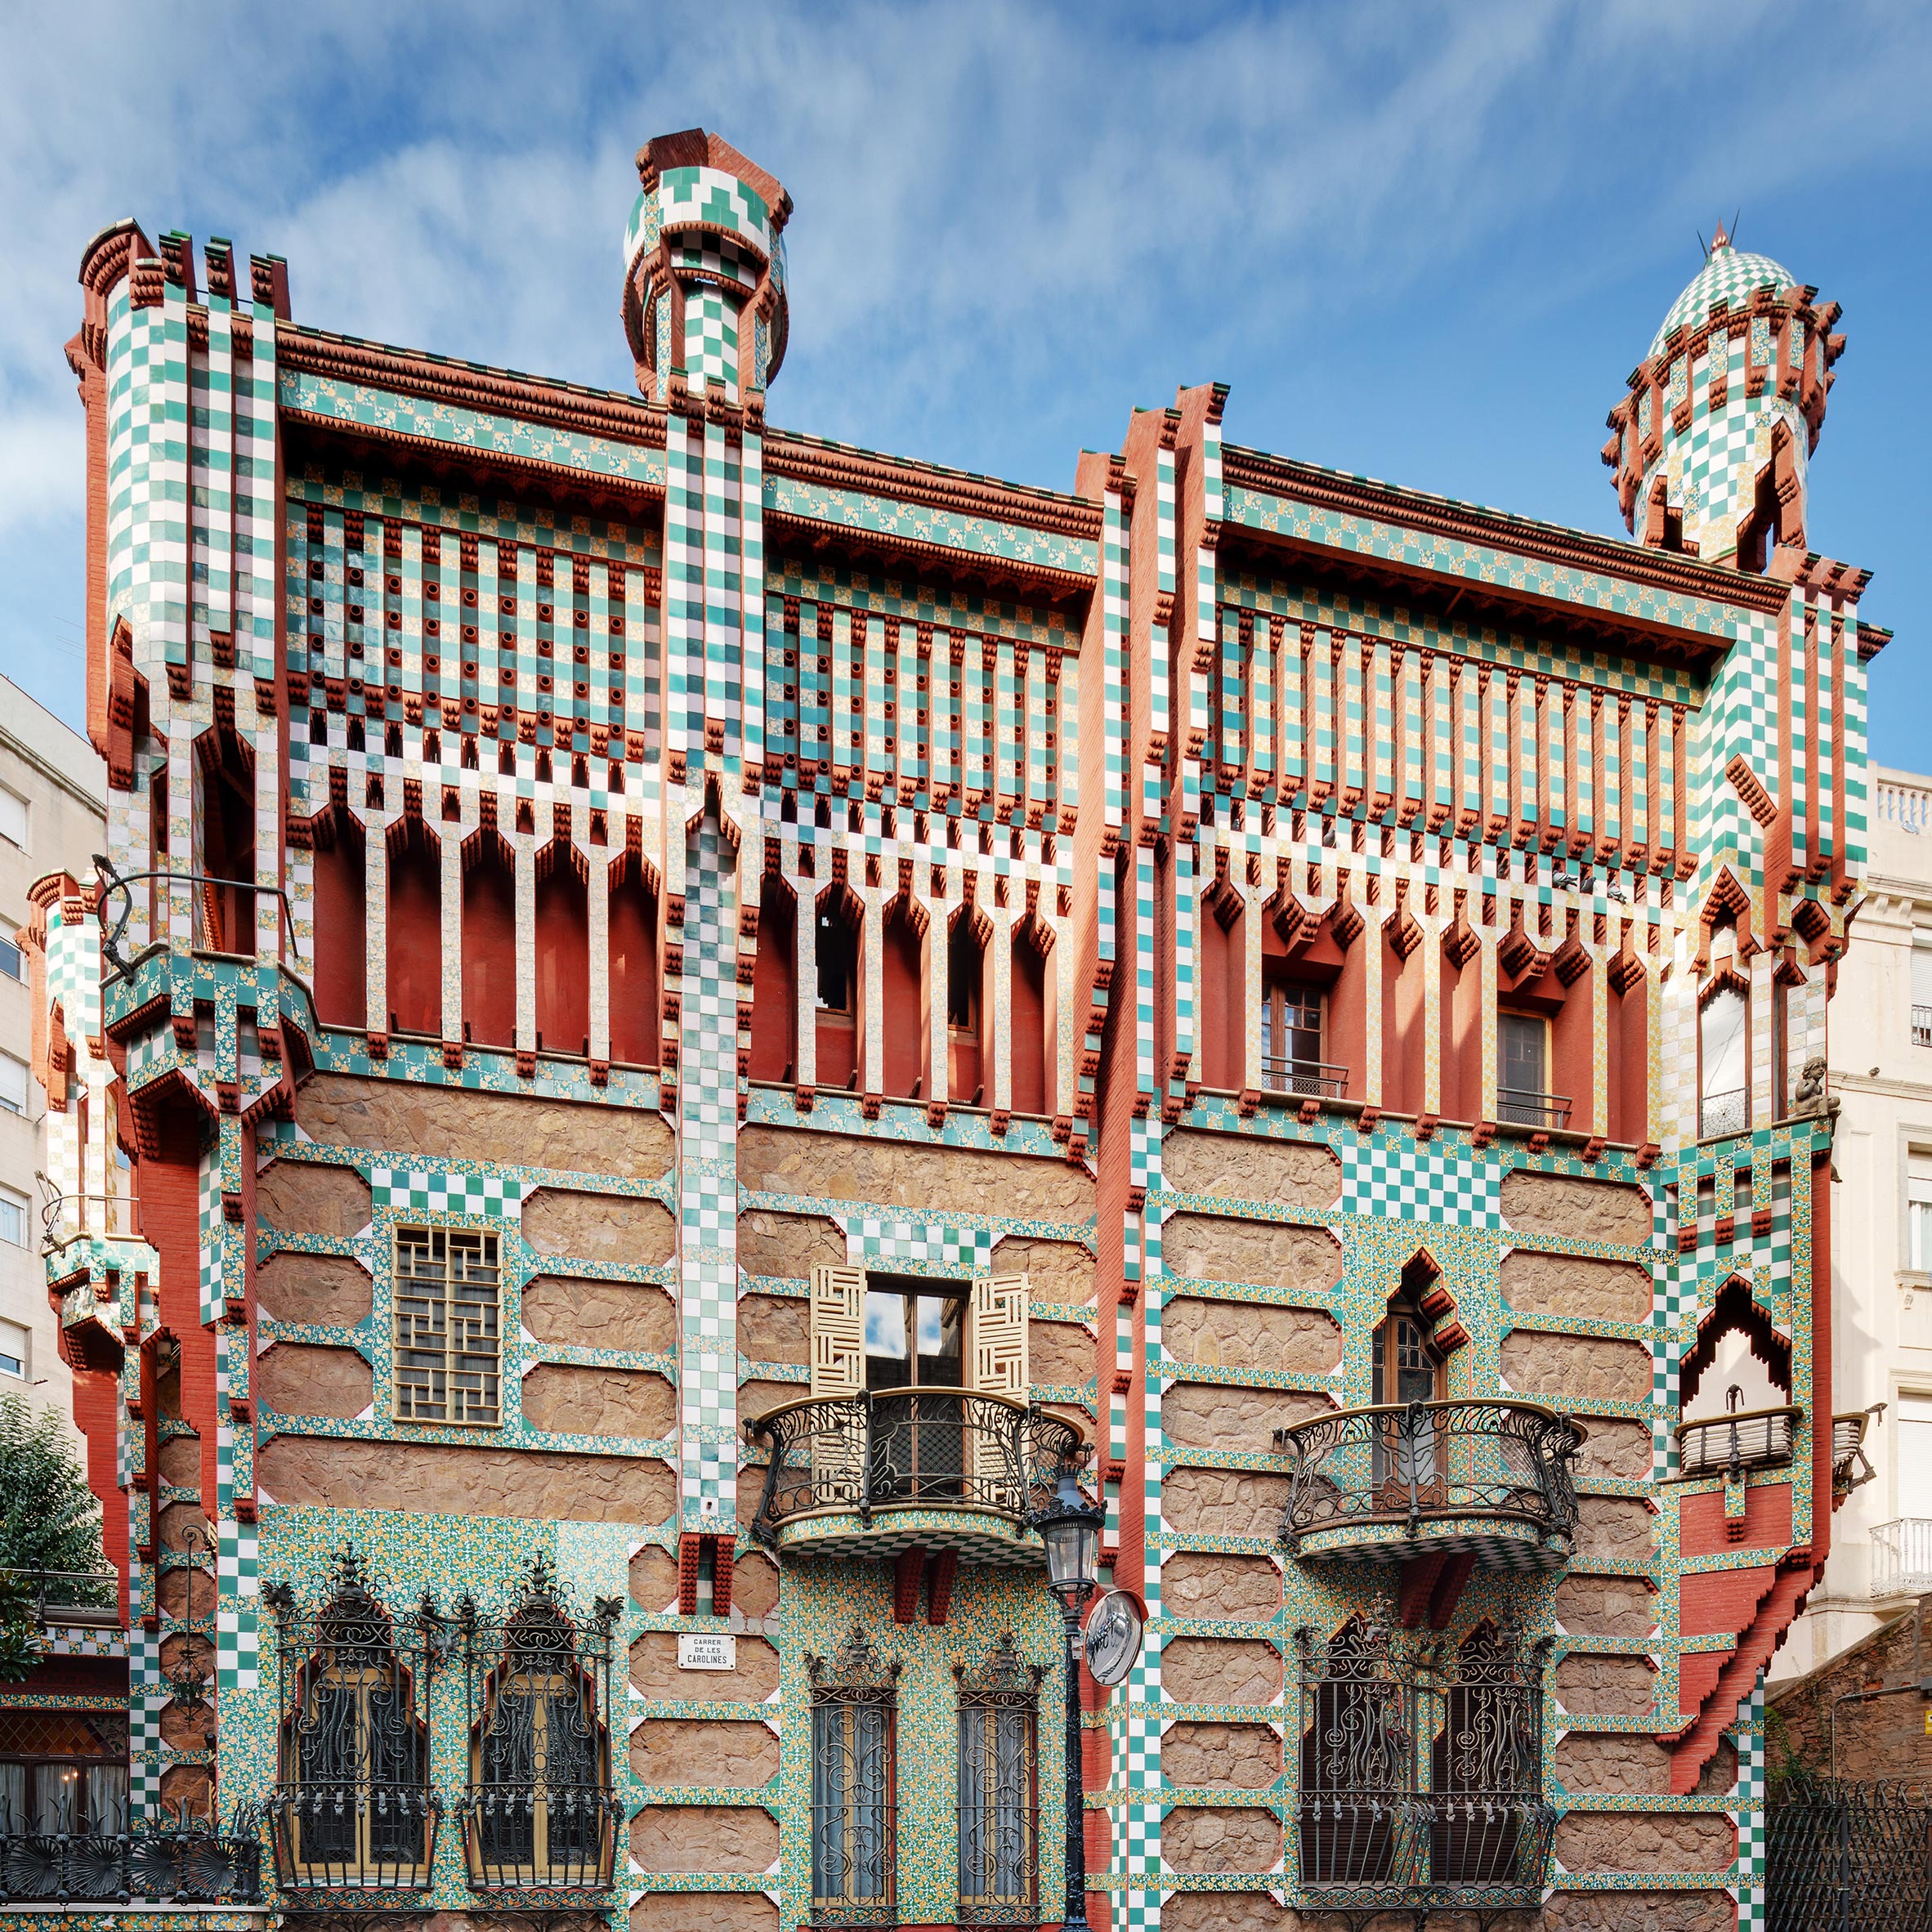 Gaudí's first built house set to open to public for first time